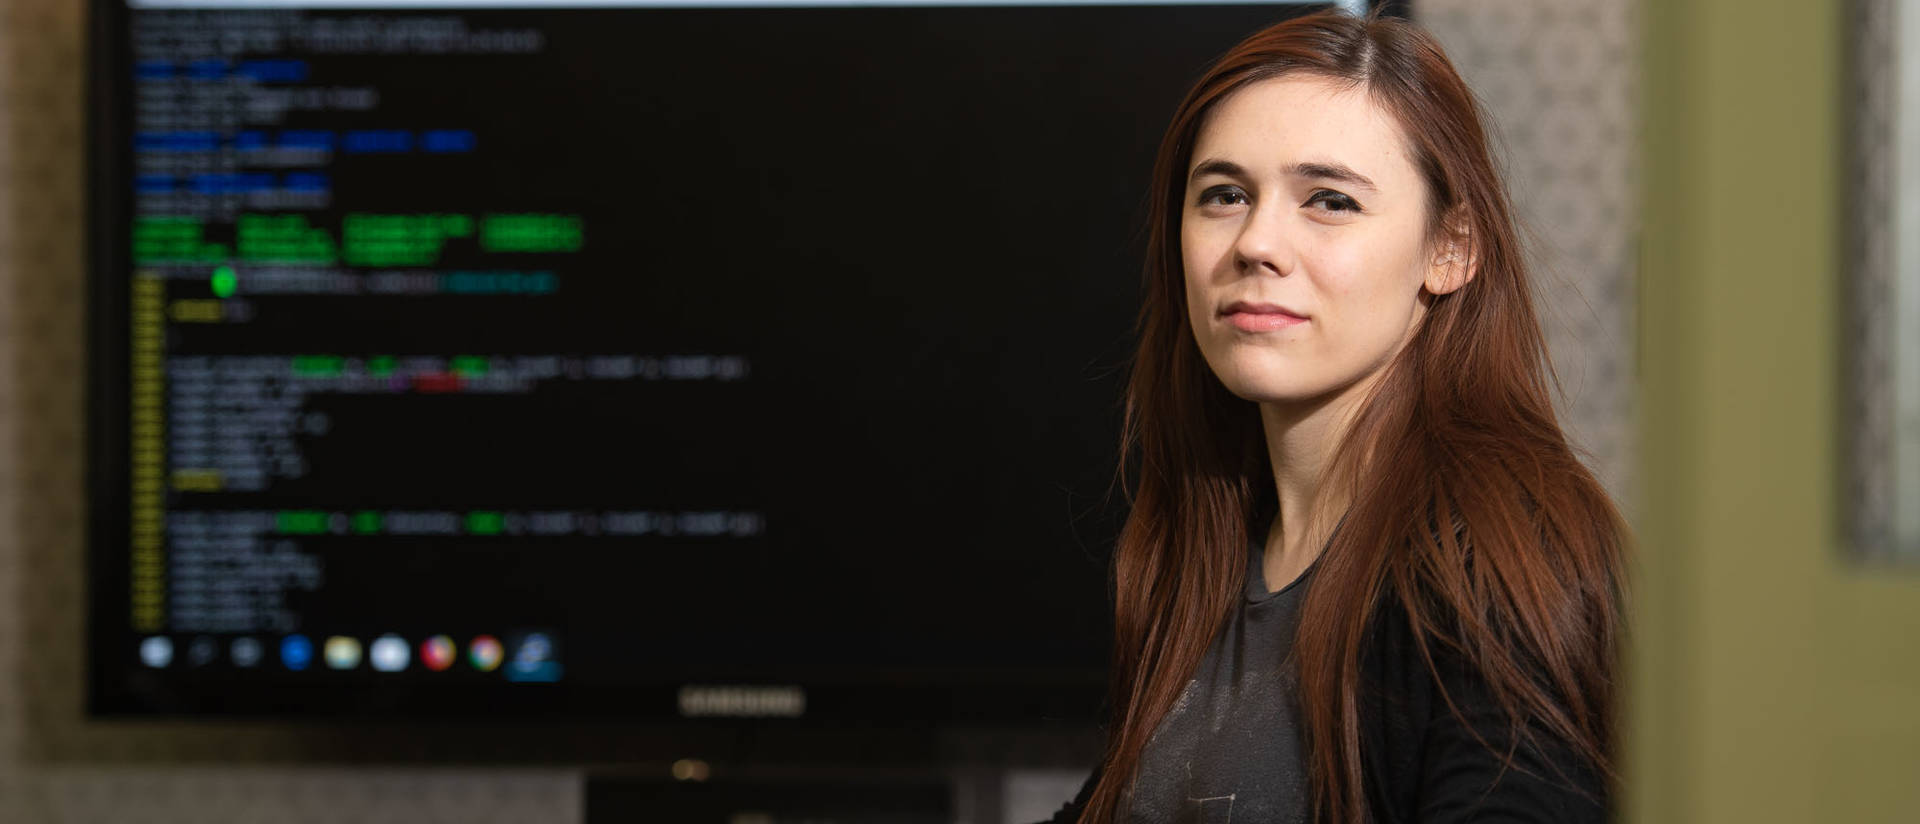 Hannah Borreson is finding success and opportunities as a computer science major.